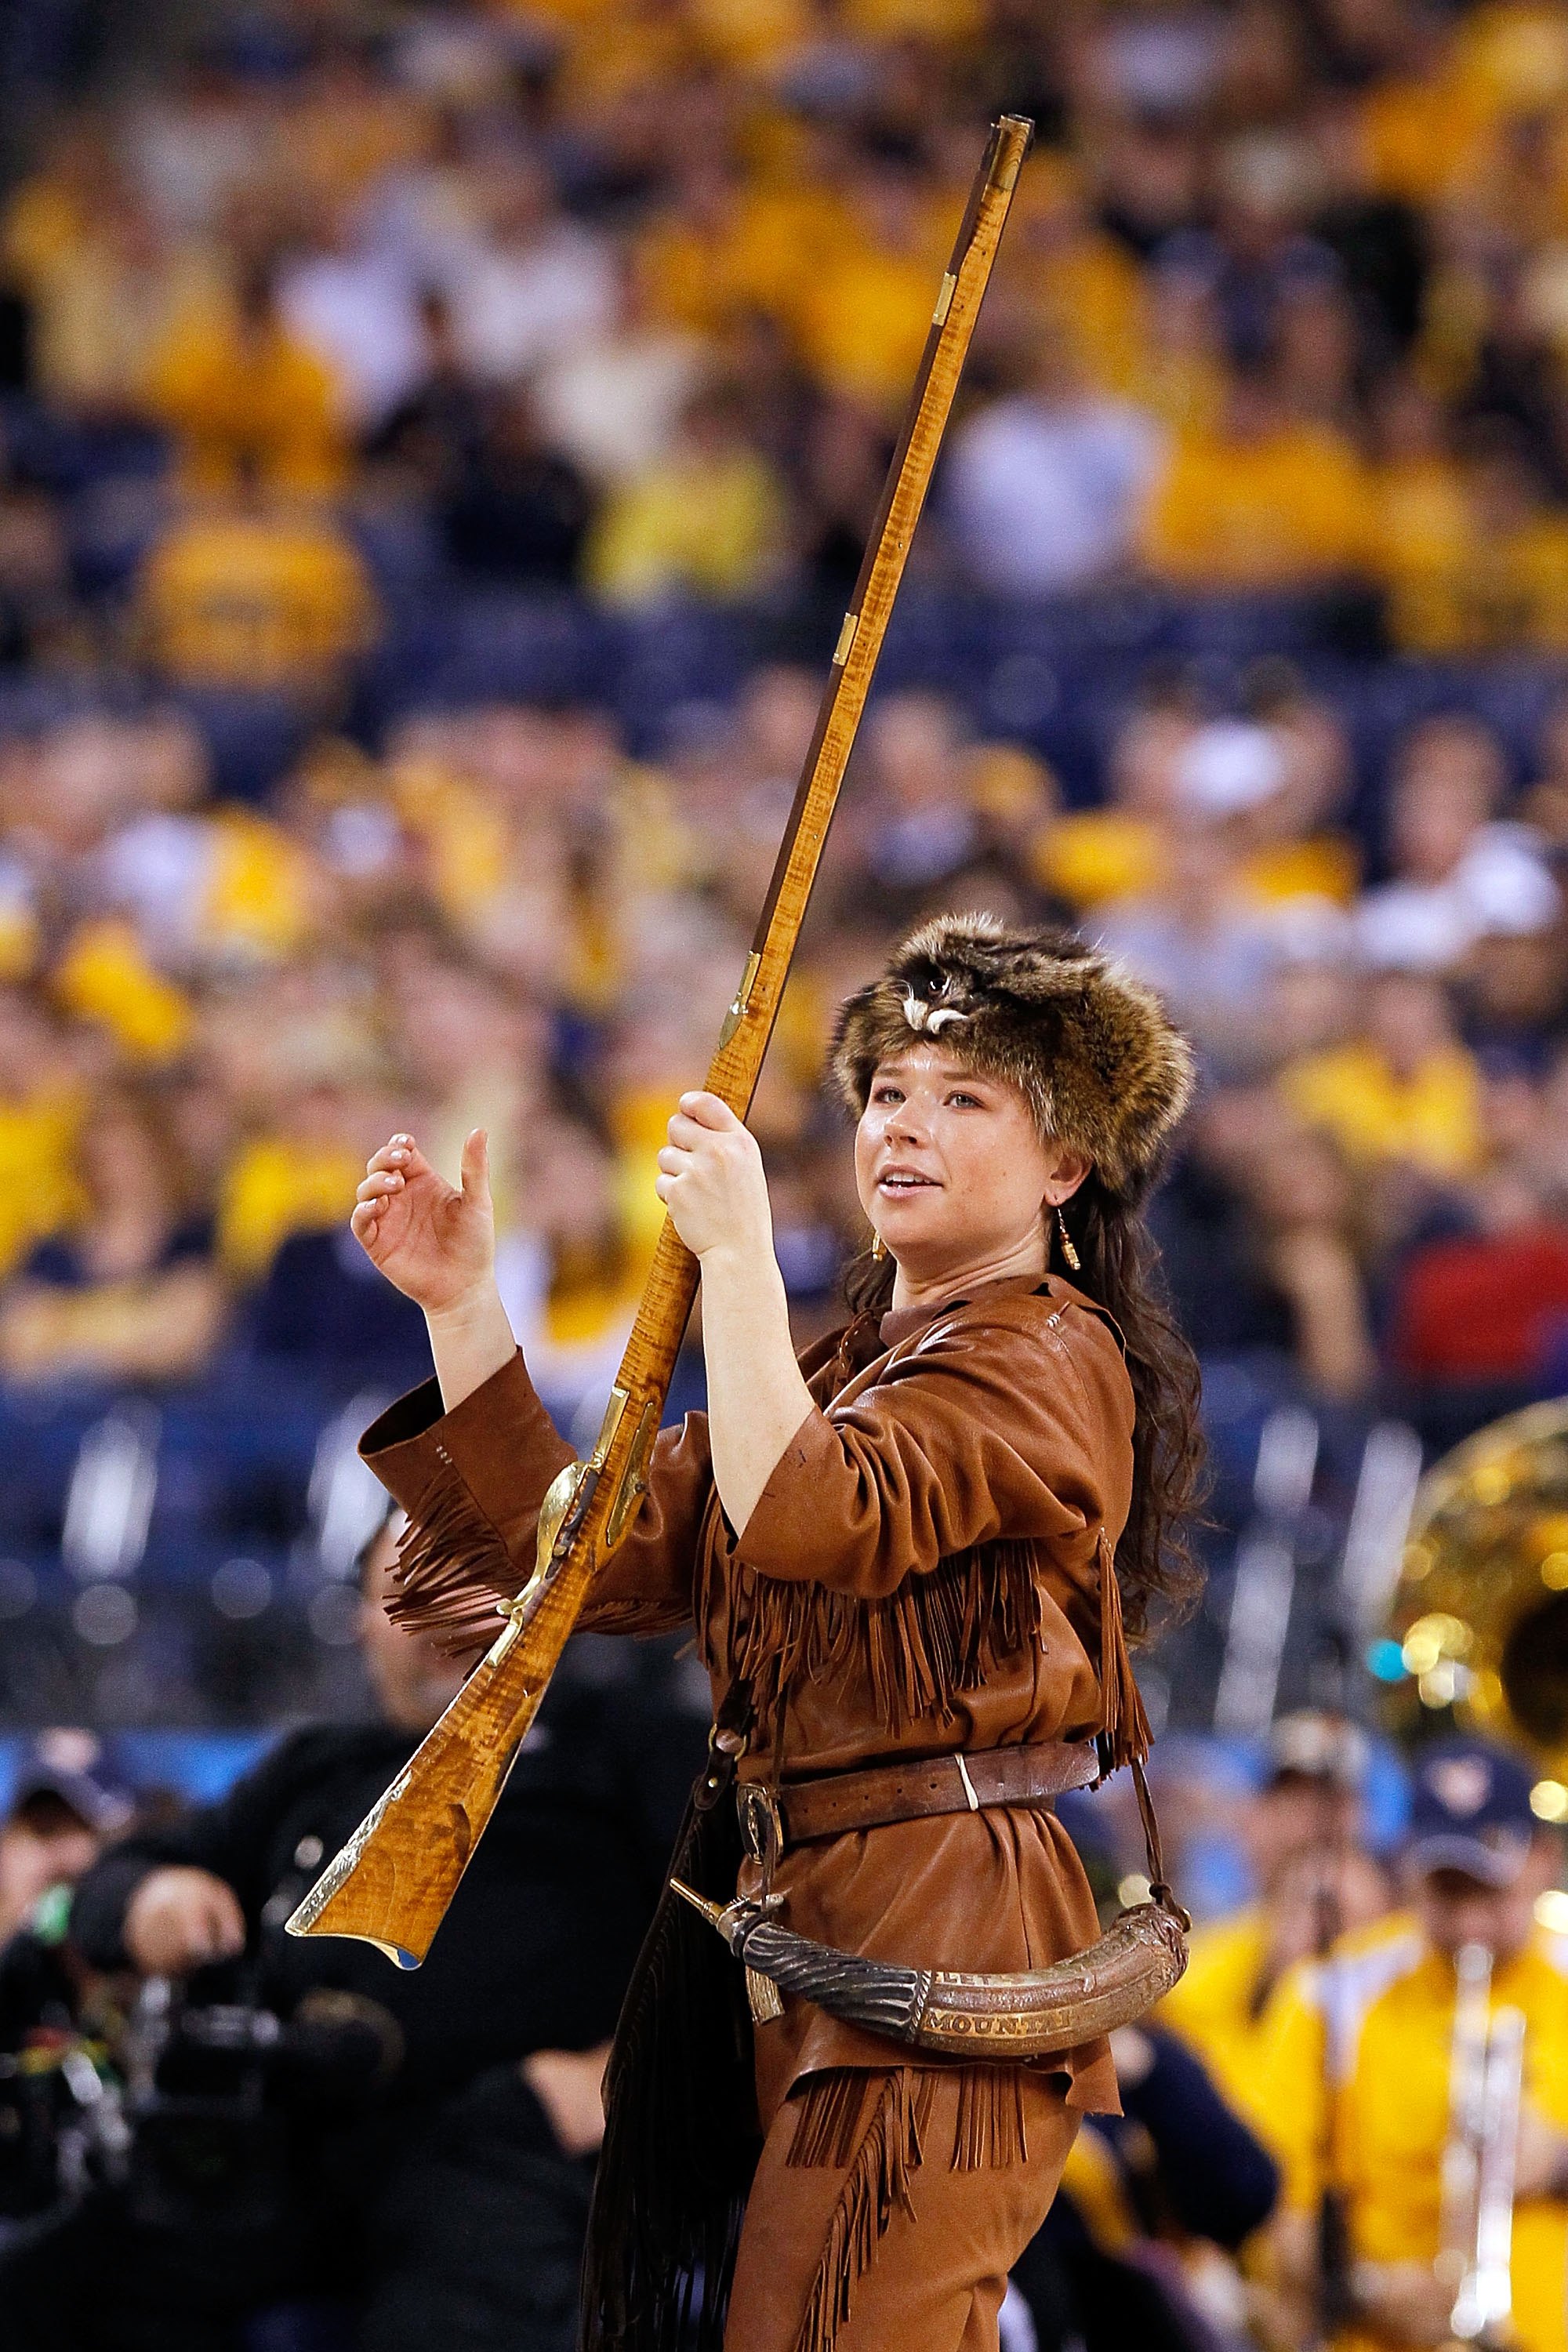 INDIANAPOLIS - APRIL 03:  Rebecca Durst, mascot for of the West Virginia Mountaineers performs during a break in the game while taking on the Duke Blue Devils during the National Semifinal game of the 2010 NCAA Division I Men's Basketball Championship at